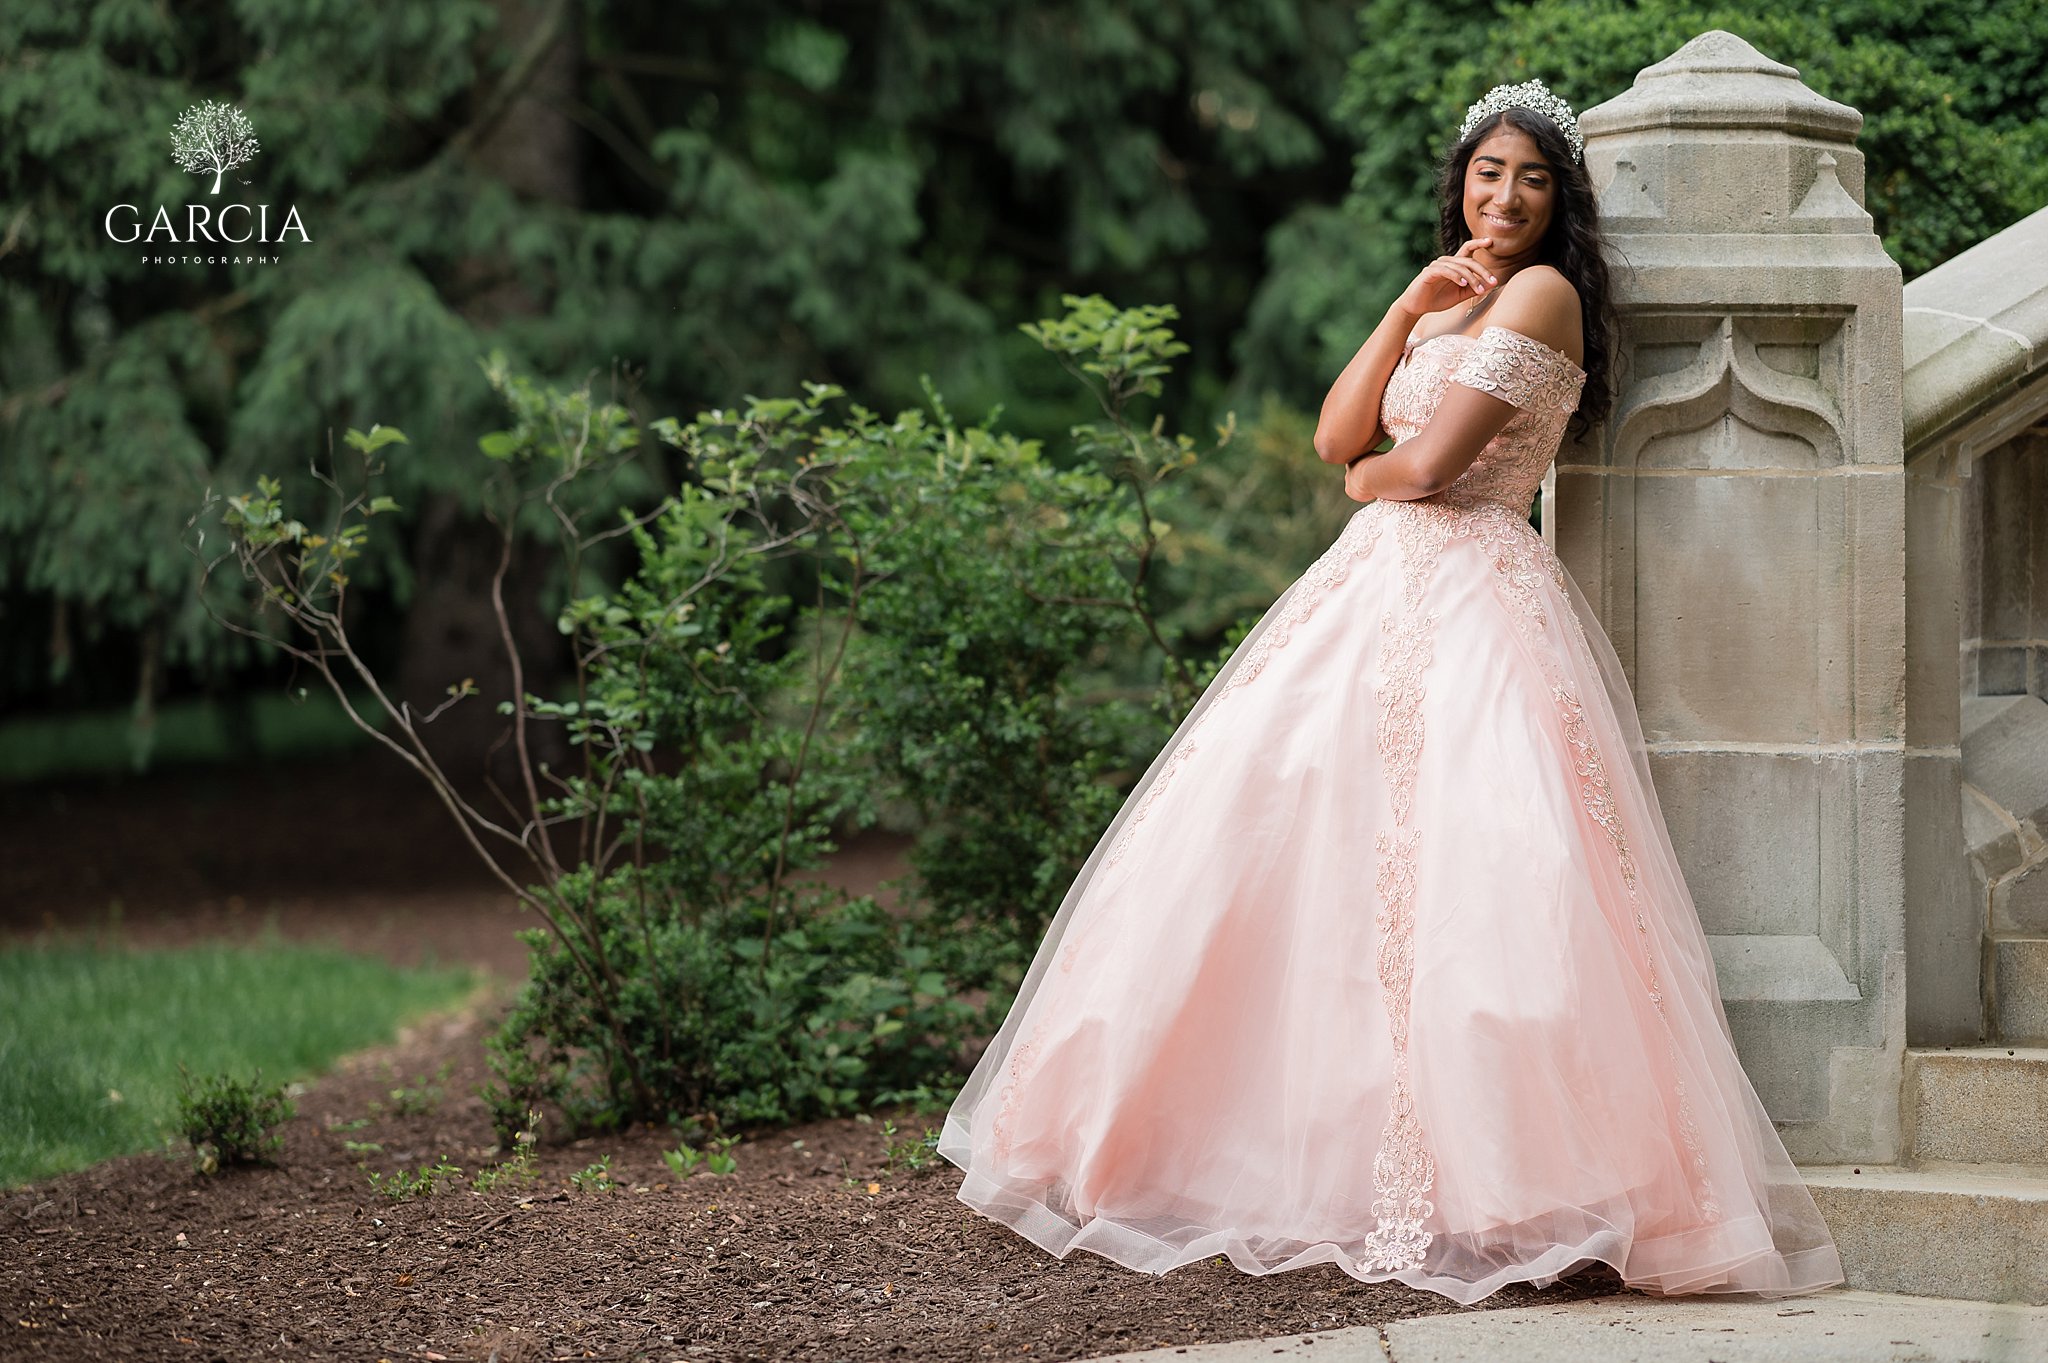 Emily-Quince-Session-Garcia-Photography-7846.jpg